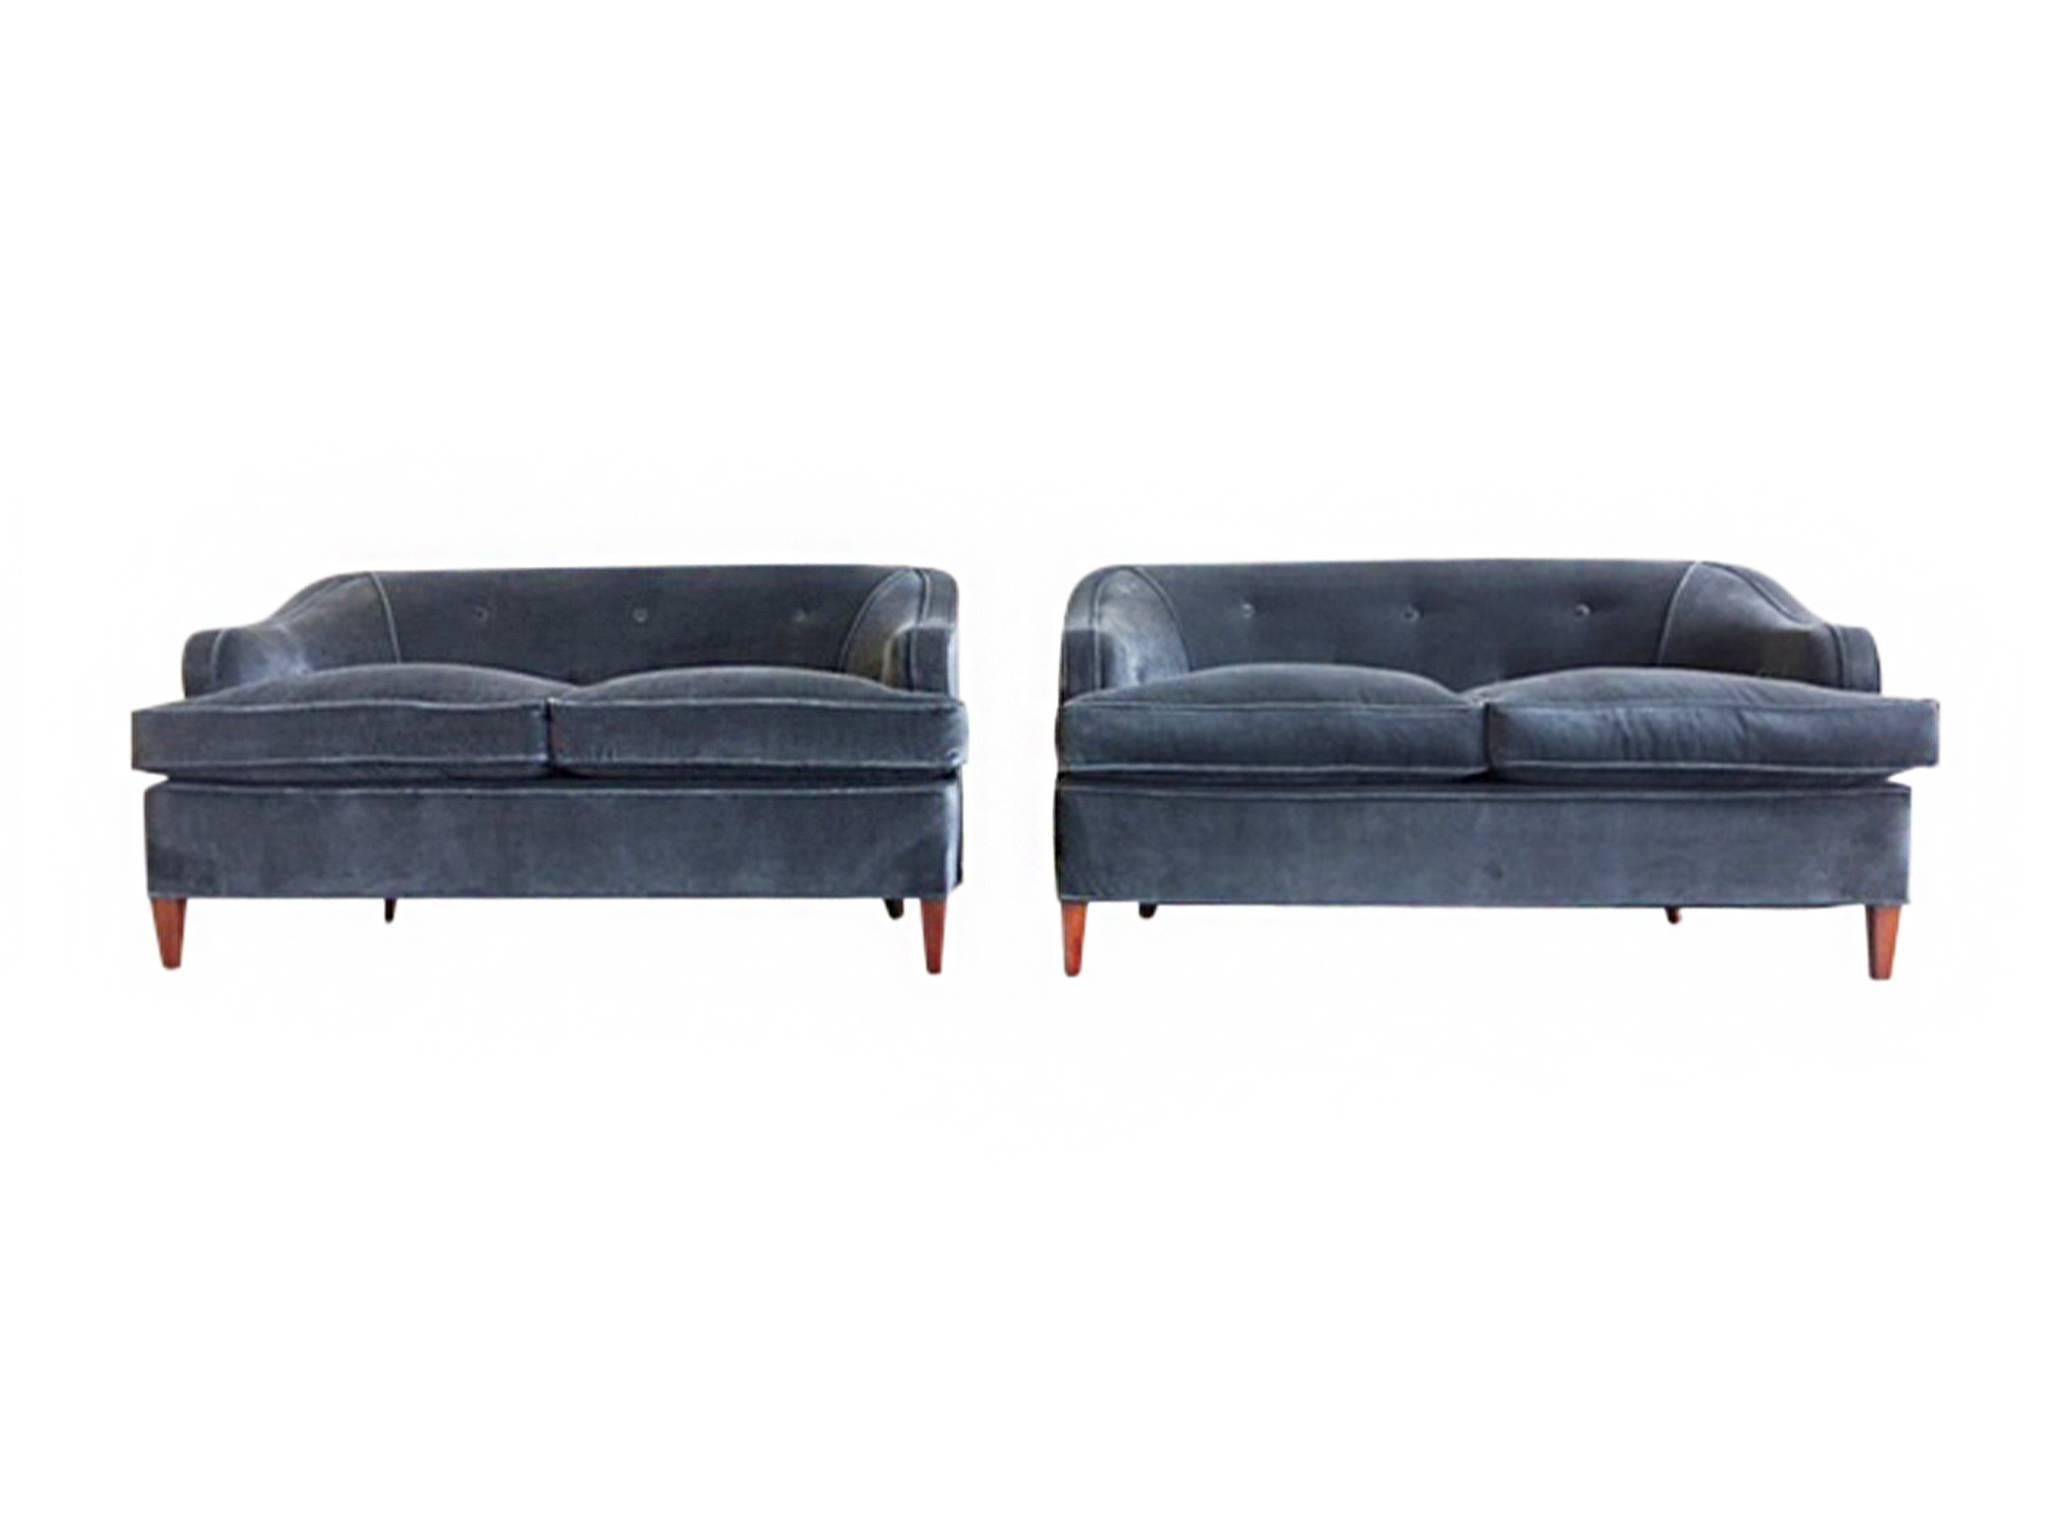 These 1930s Art Deco settees are newly reupholstered in a smoky blue brushed velvet. The fabric is soft and covers new down cushions, creating an ideal immersive surface for comfort and rest. With clean lines and rounded edges, the sofas strike a